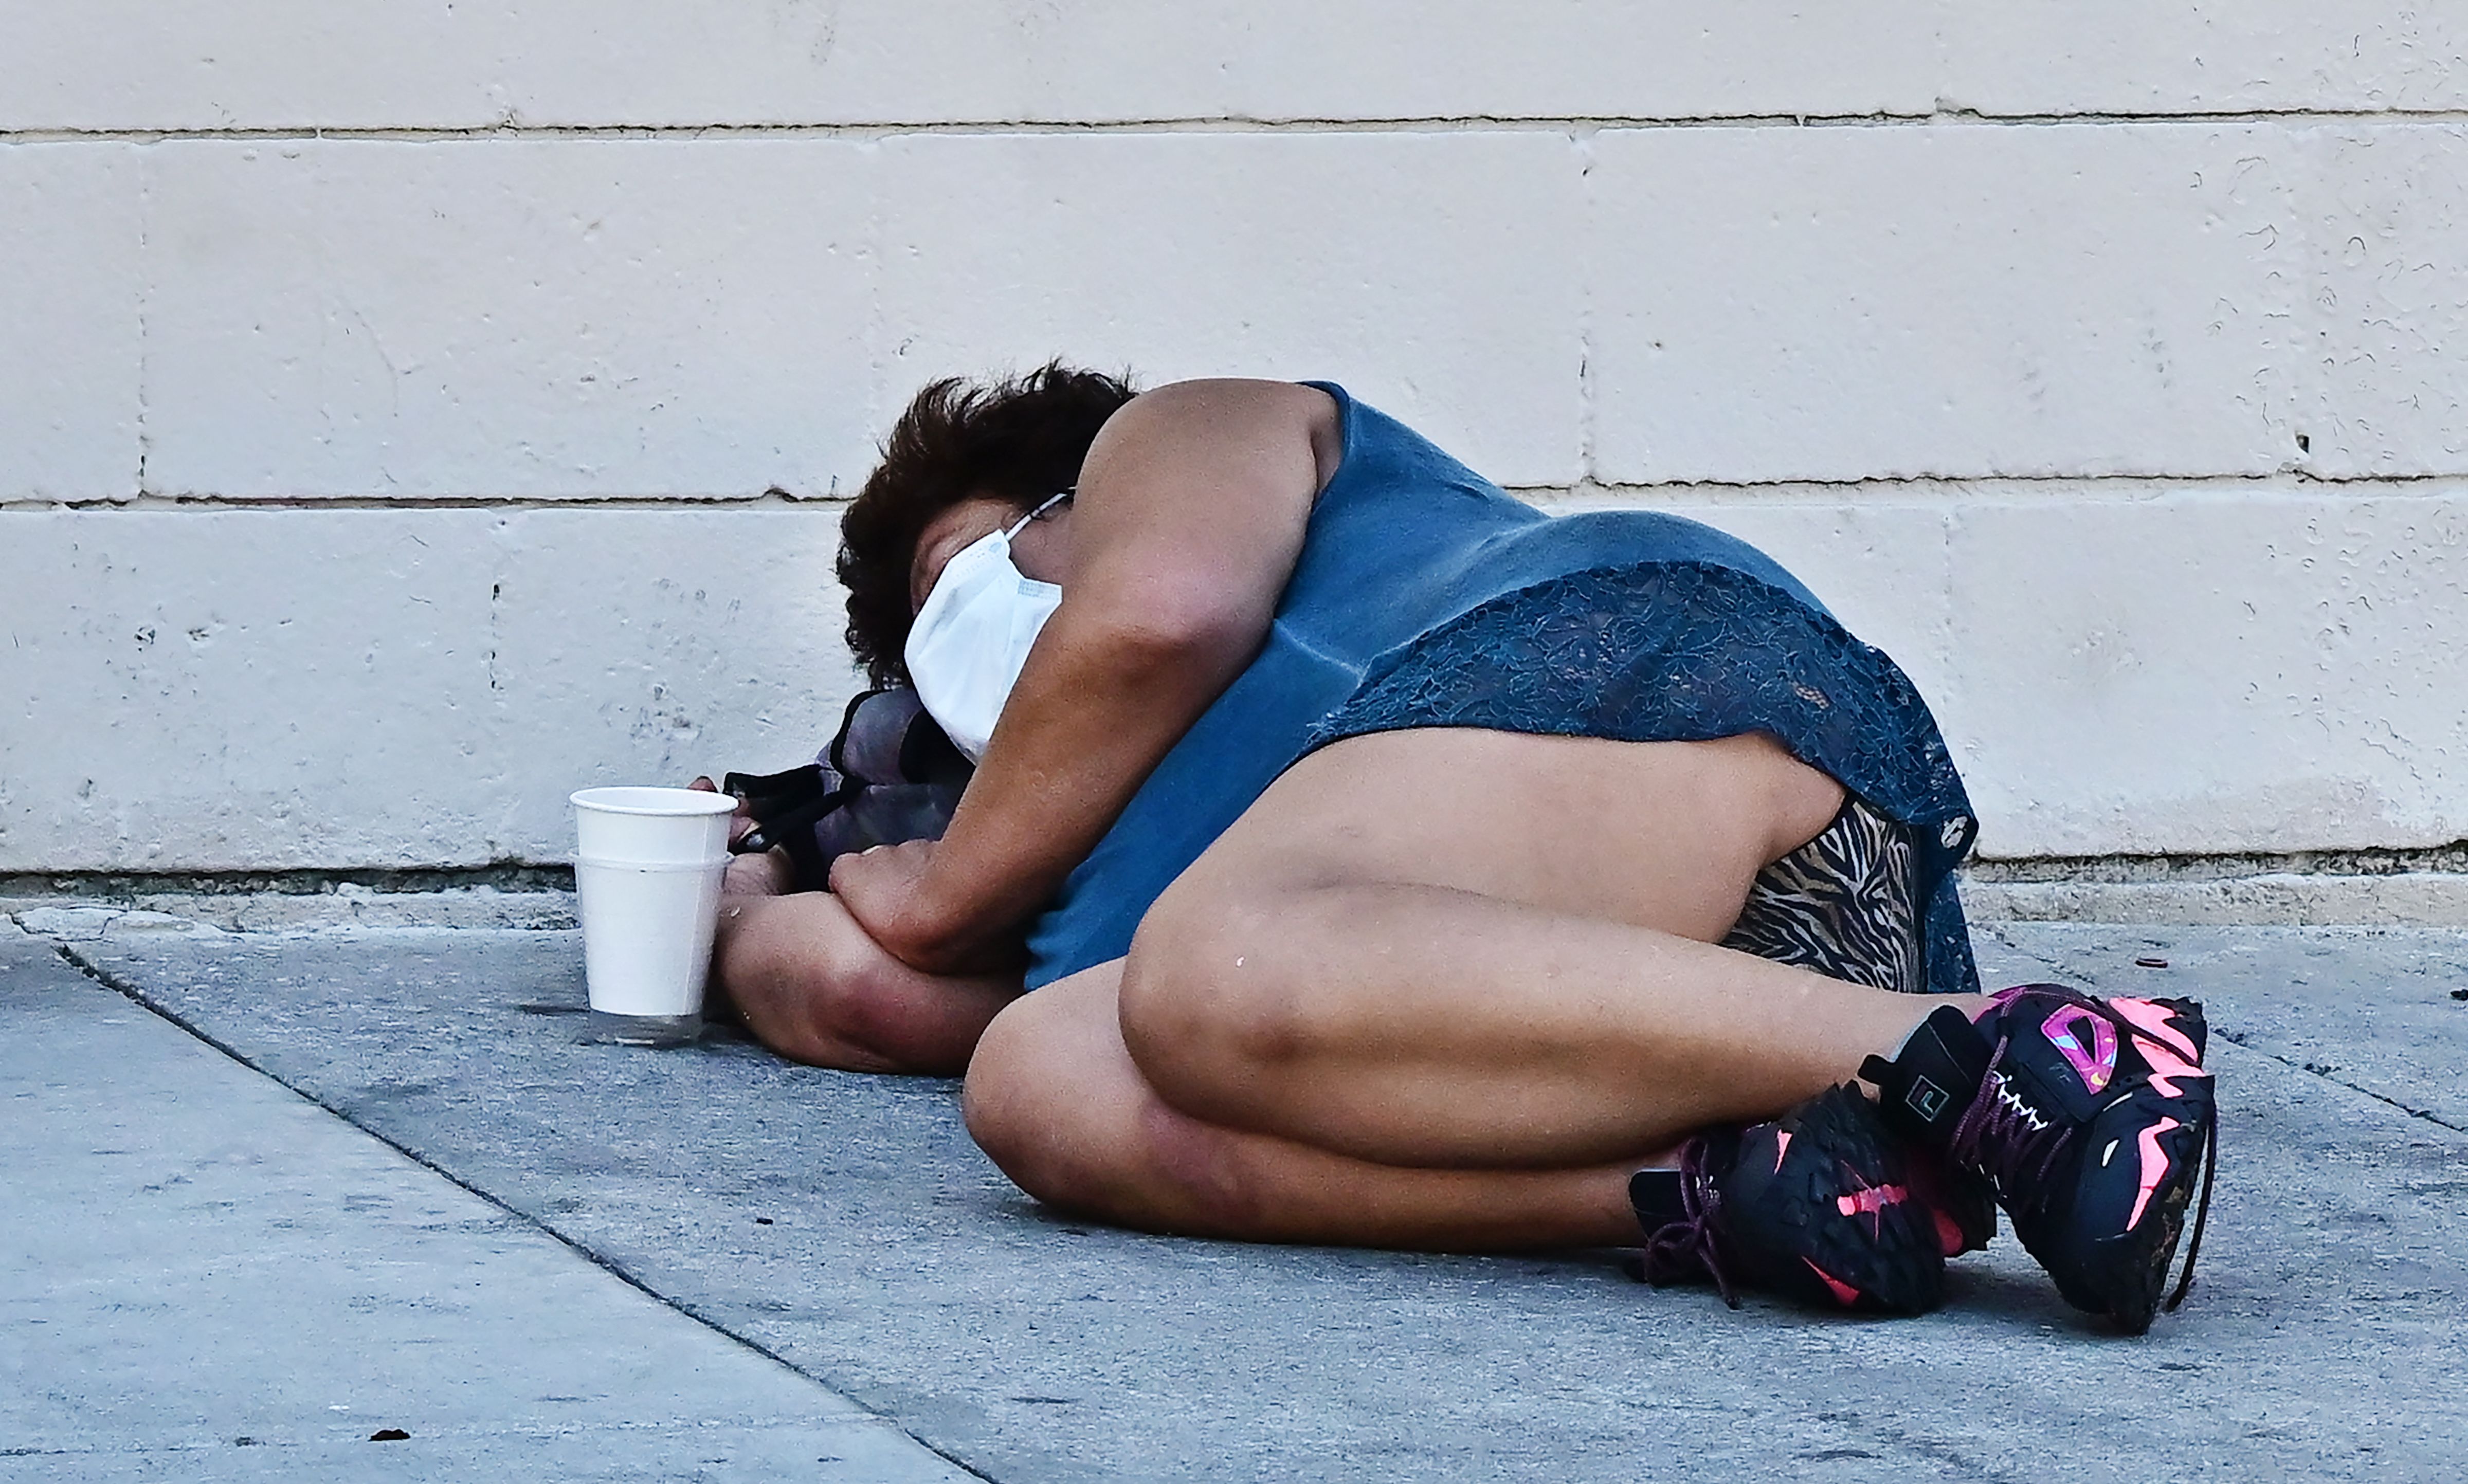 A woman sleeps on a sidewalk on August 16, 2023, in Los Angeles, California, where homelessness has seen a 10 percent surge compared to last year. A recent report from the Los Angeles Homeless Services Authority reveals an estimate of 42,260 people living on the streets of Los Angeles without shelter, as the homeless population has more than doubled over the past decade. (Photo by Frederic J. BROWN / AFP) (Photo by FREDERIC J. BROWN/AFP via Getty Images)